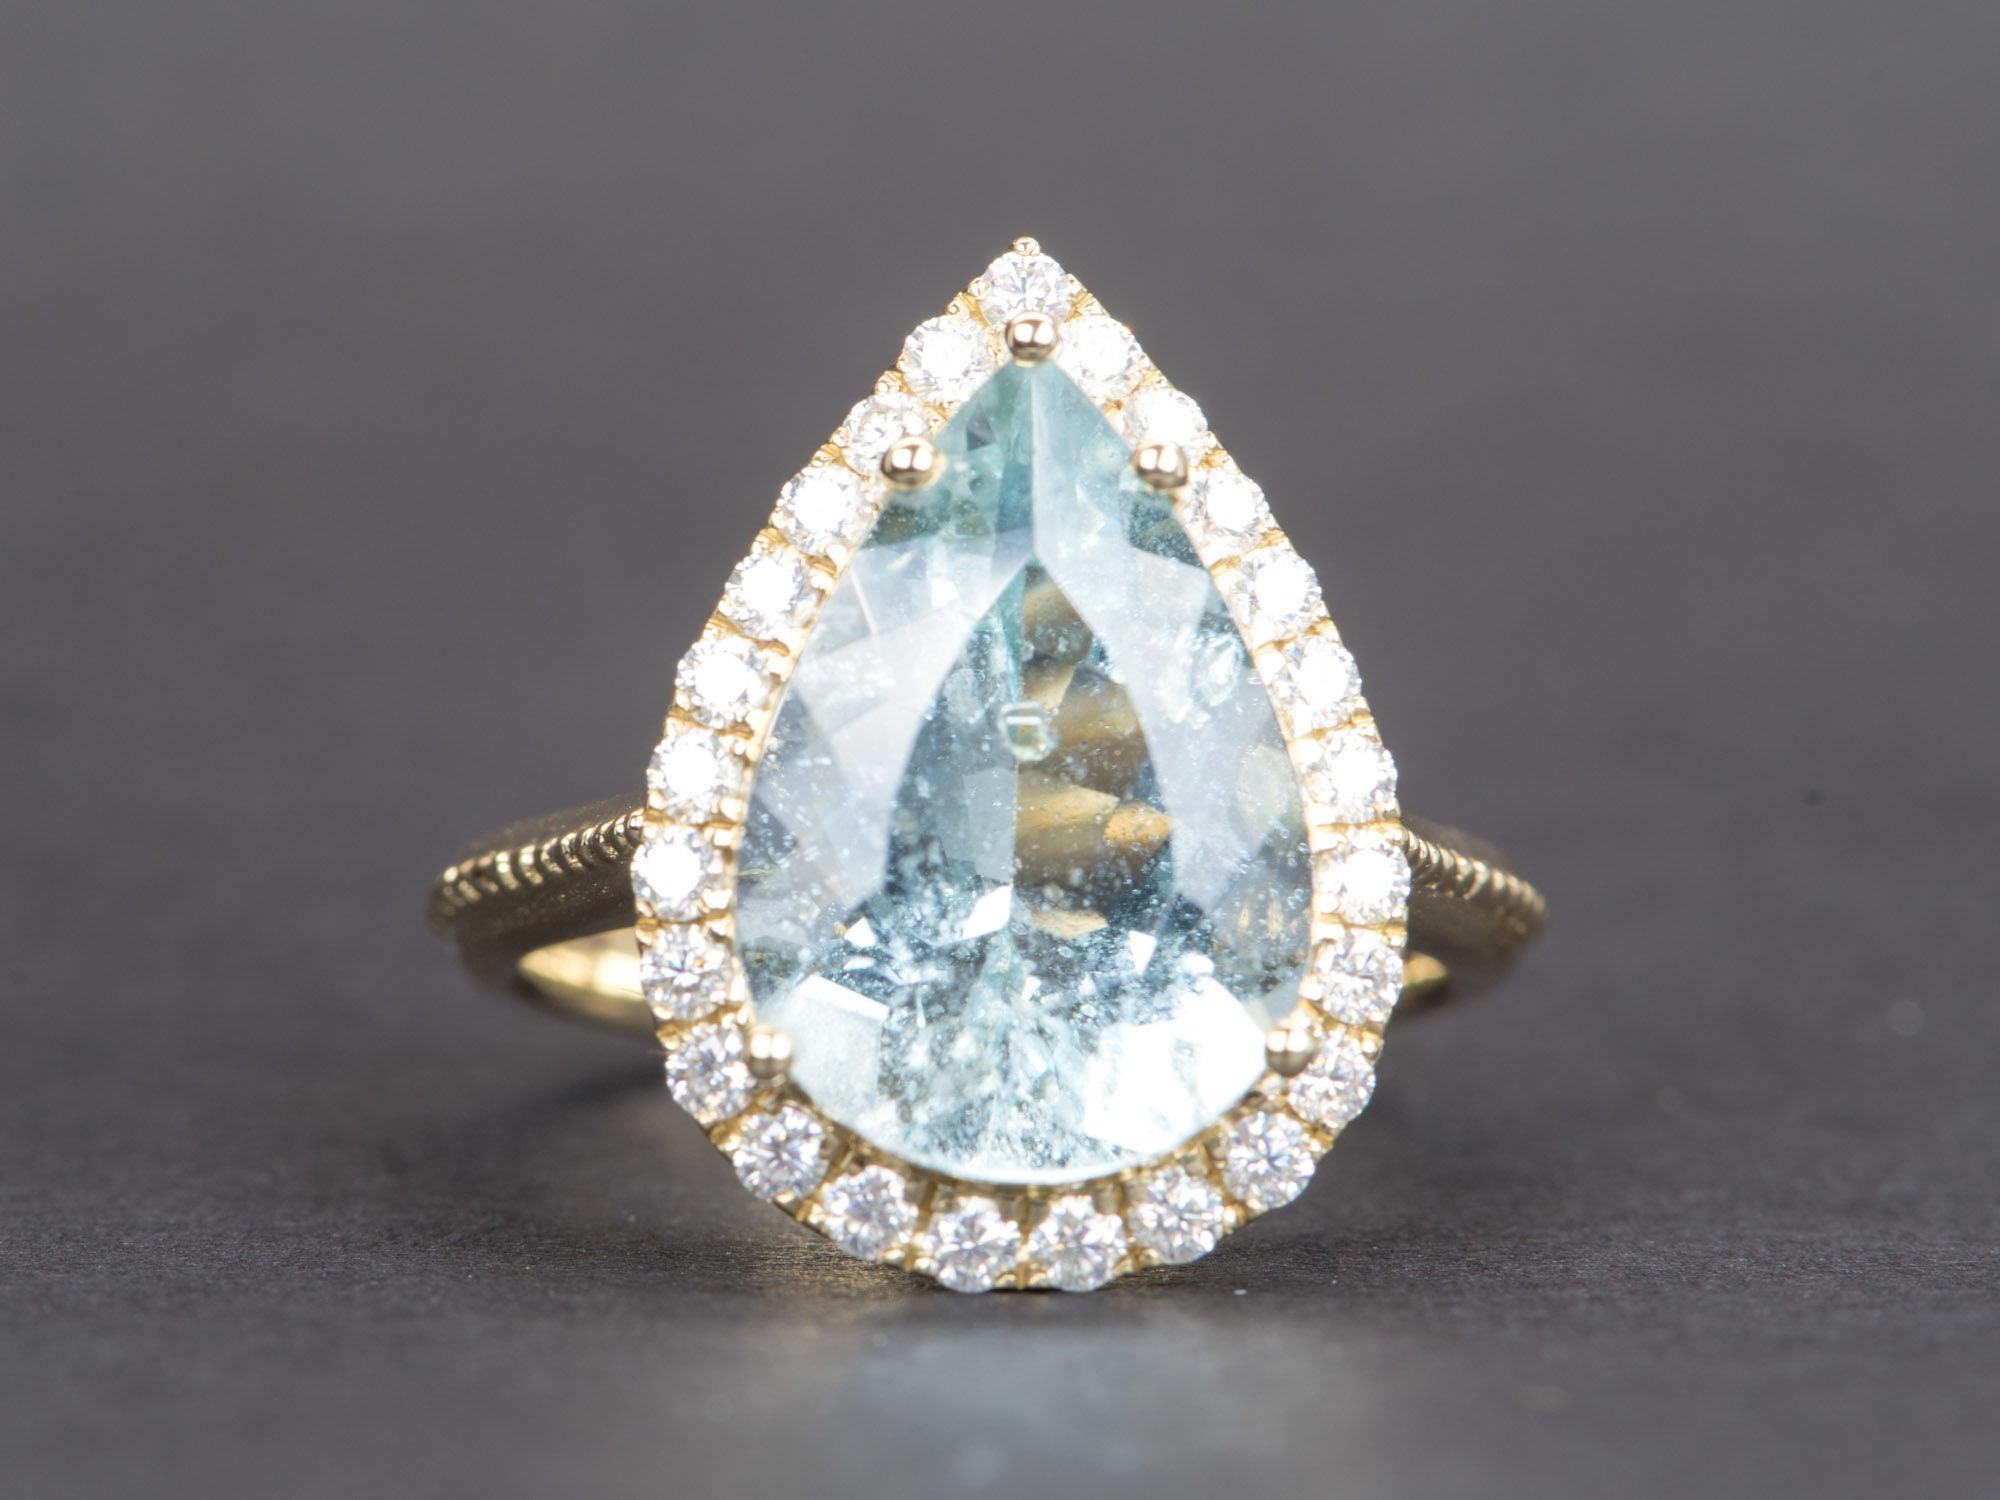 ♥ 6.48ct Statement Galaxy Aquamarine with Moissanite Halo 9K Gold Ring
♥ Solid 9k yellow gold ring set with a beautiful pear-shaped aquamarine
♥ Gorgeous blue color!
♥ The item measures 20.5 mm in length, 15.2 mm in width, and stands 8.4 mm from the